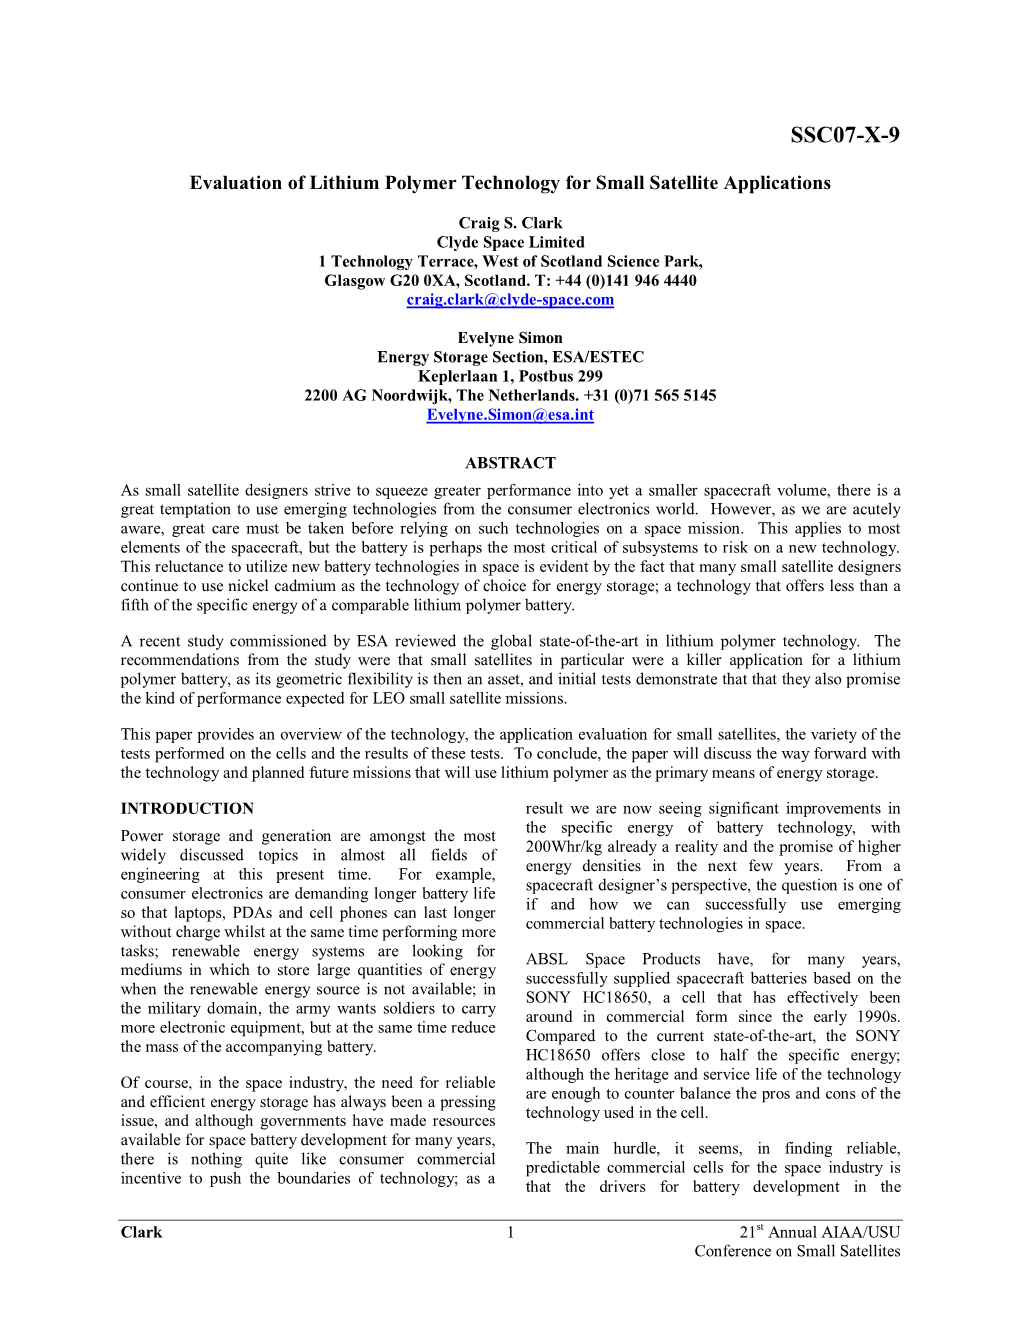 Evaluation of Lithium Polymer Technology for Small Satellite Applications